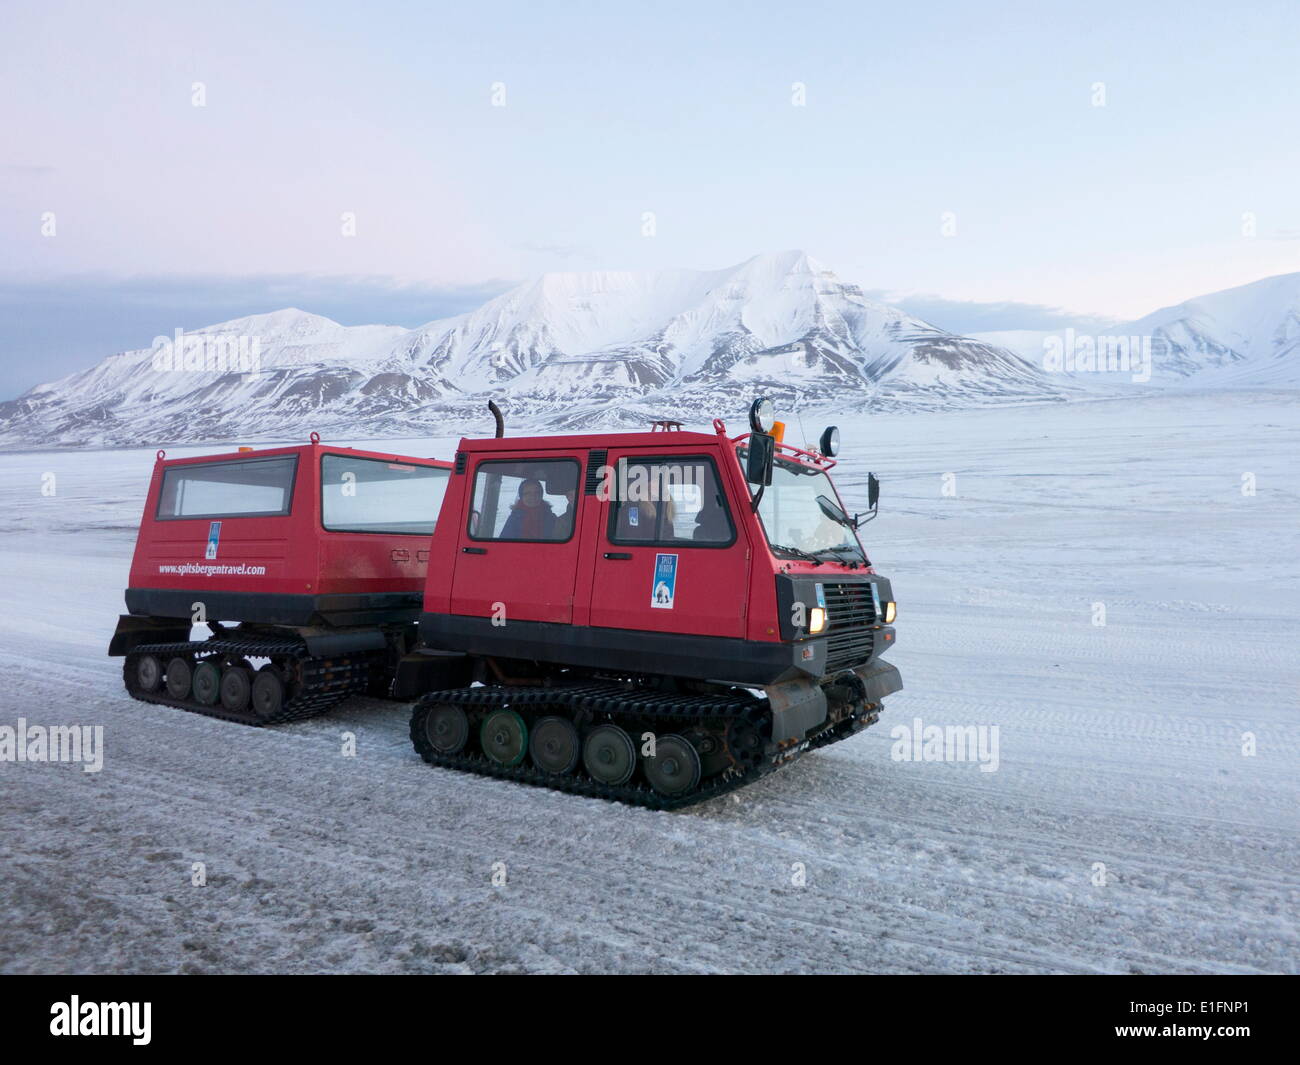 A snowcat vehicle is used for visitors and tourists to view landscapes protected from the winter cold, Svalbard, Arctic, Norway Stock Photo